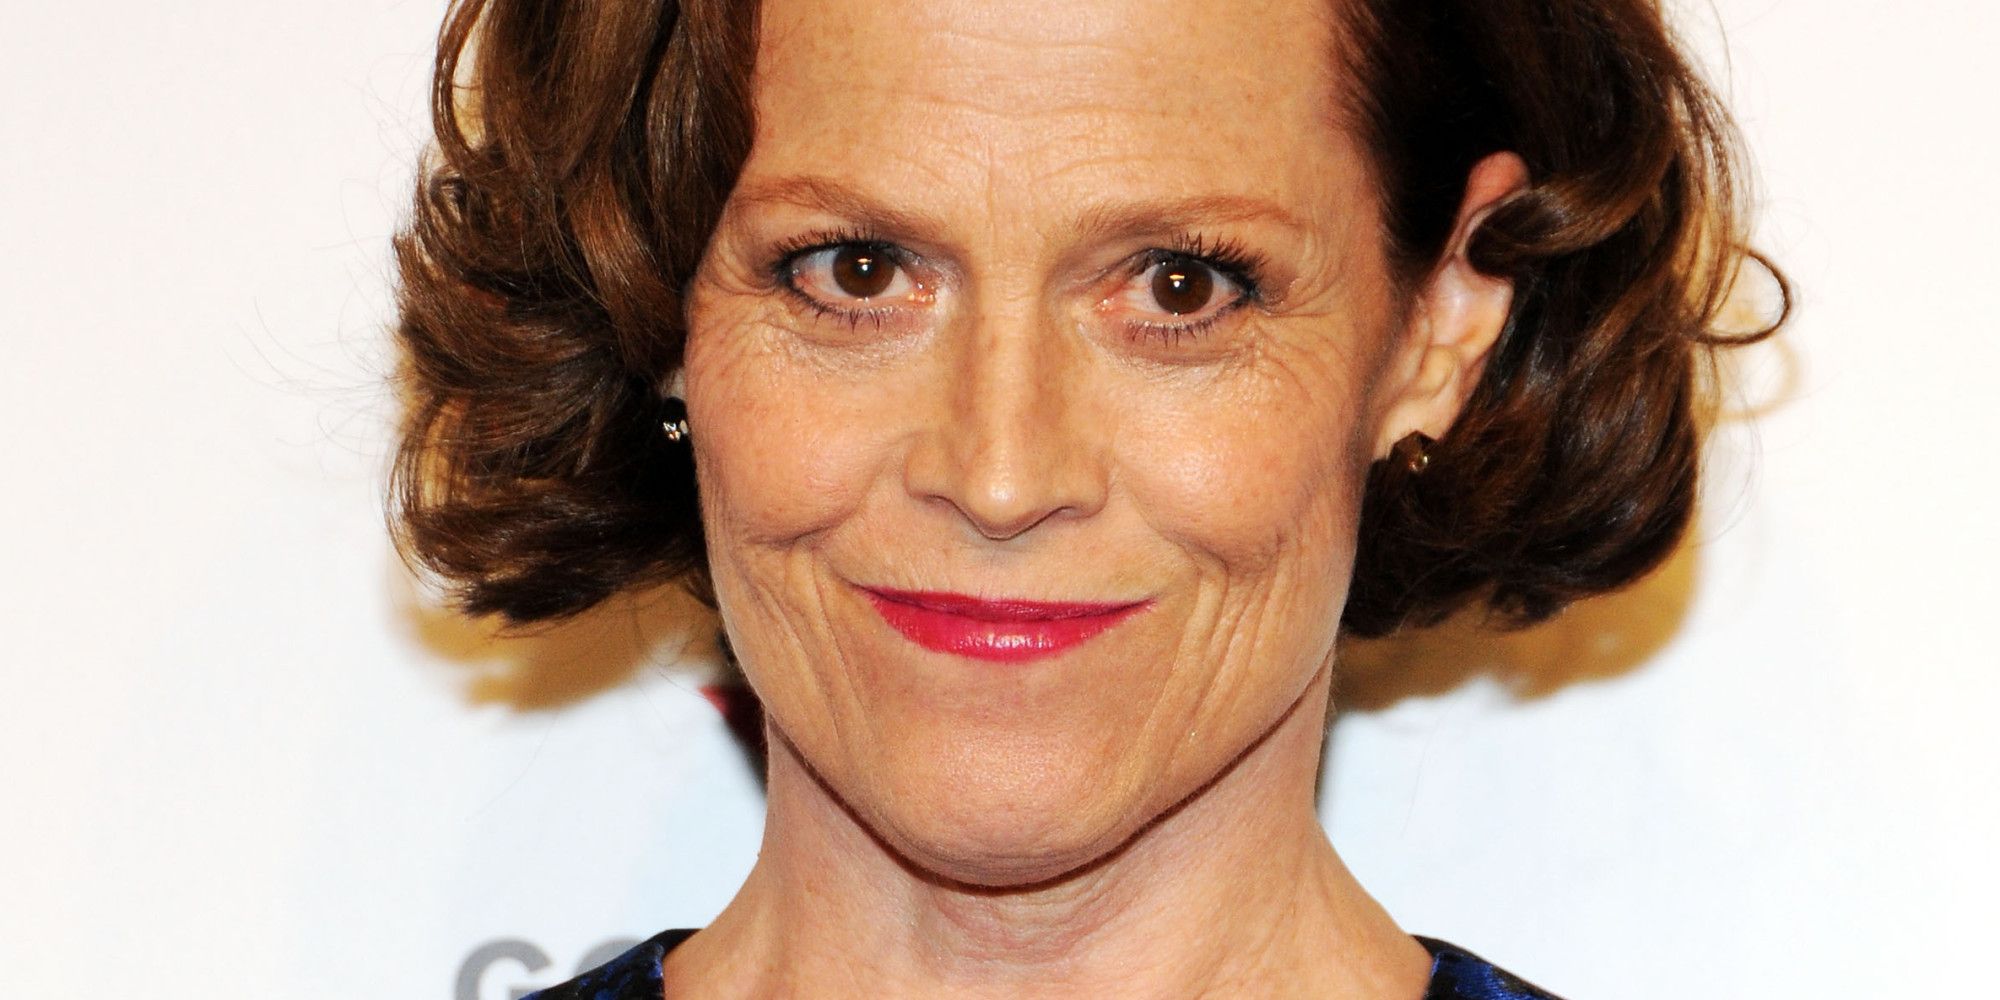 Is Sigourney Weaver set to lead The Expendabelles?